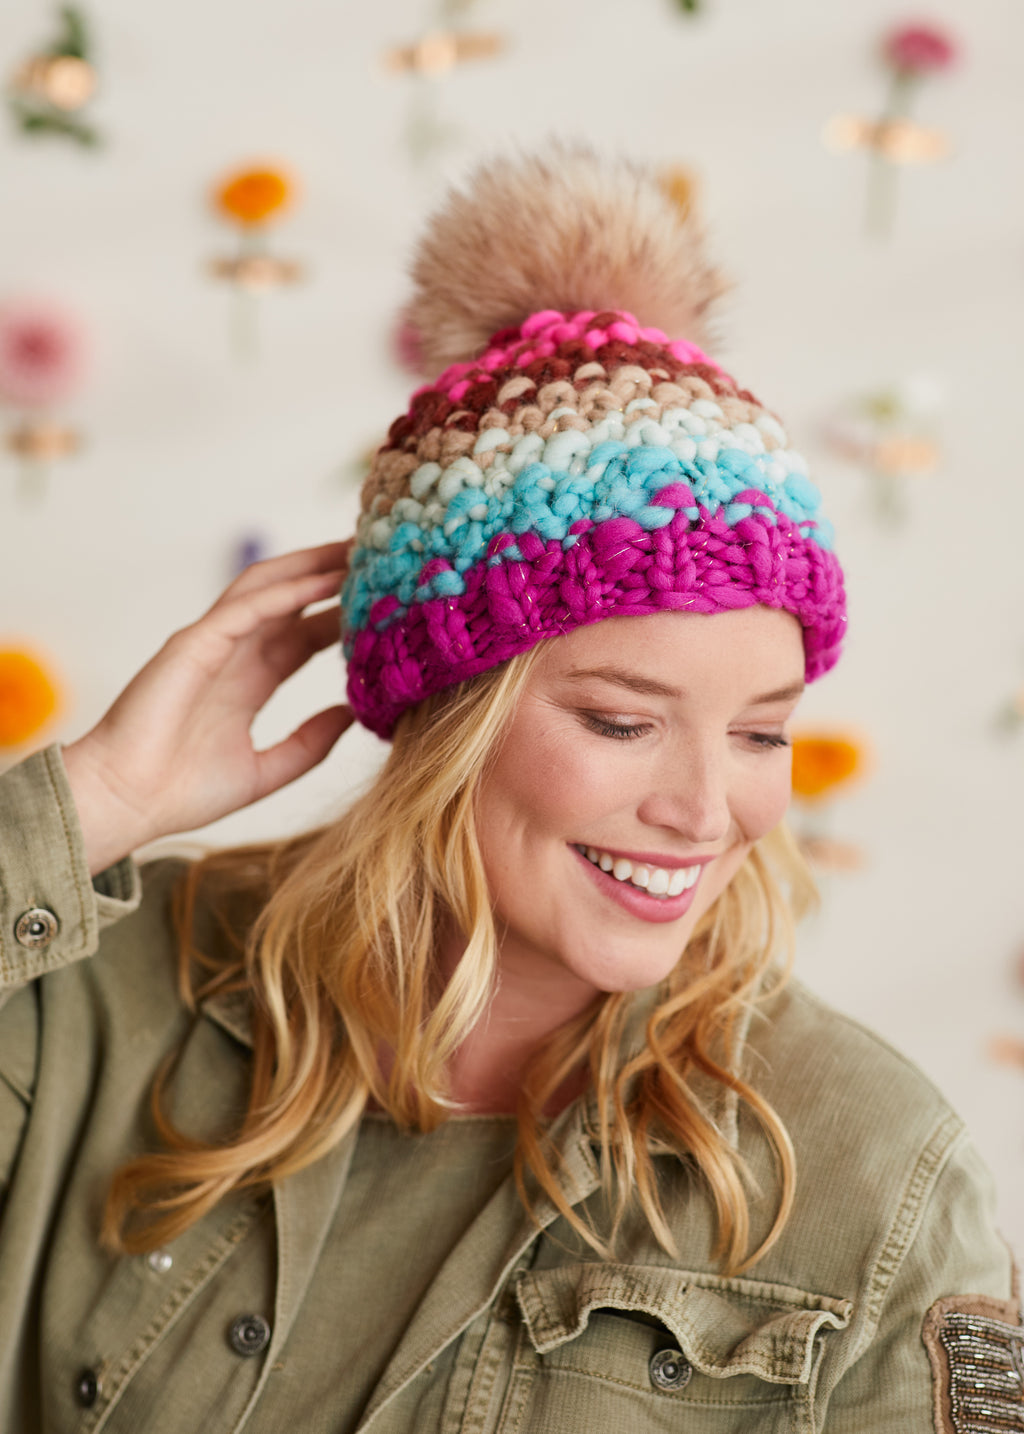 Smiling modeling with hand on a knitted hat.